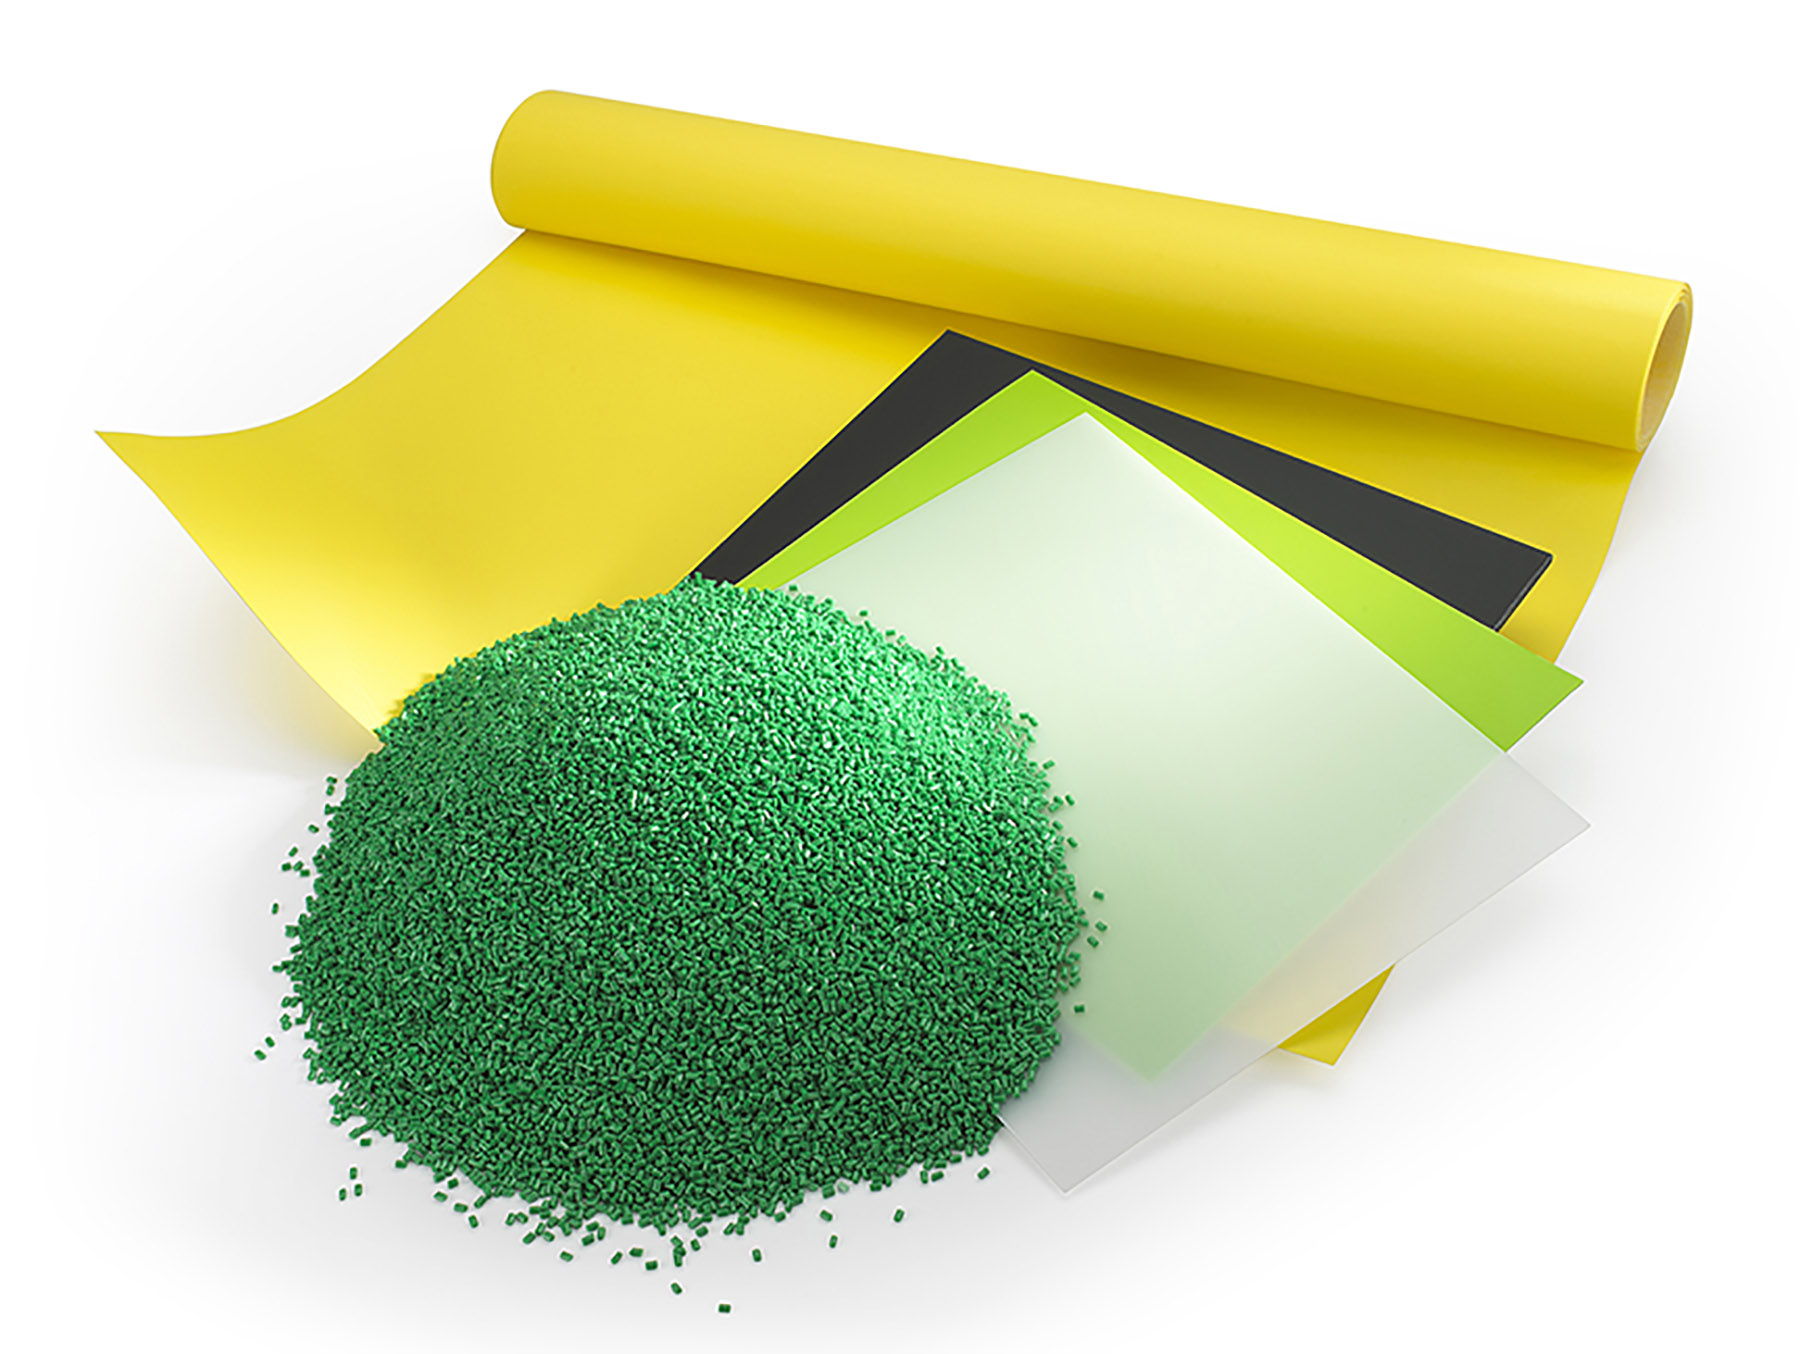 RTP offers thermoplastic technologies in pellet, sheet, and film.